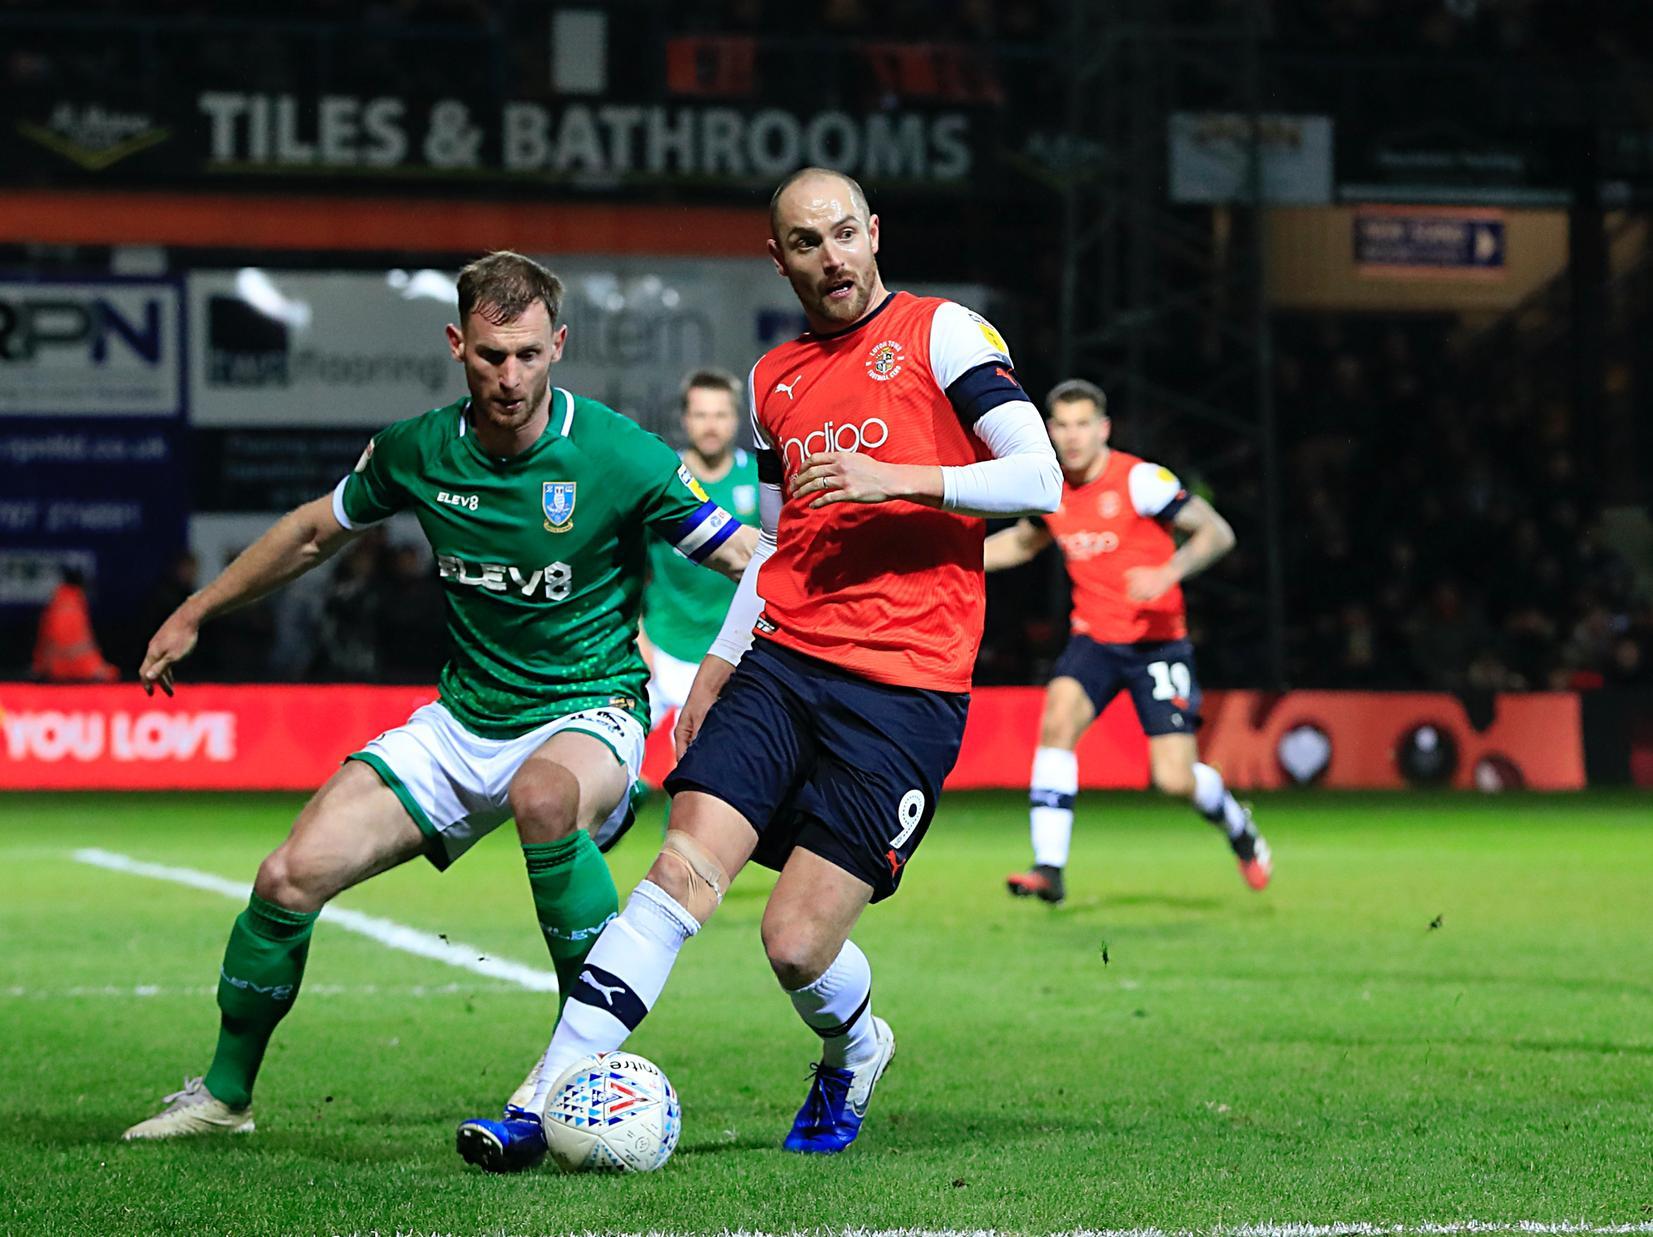 Great to see him back out on the pitch for Luton as he made a long-awaited return from his knee injury. Played his part in ensuring the ball stuck up front in the final 20 minutes.